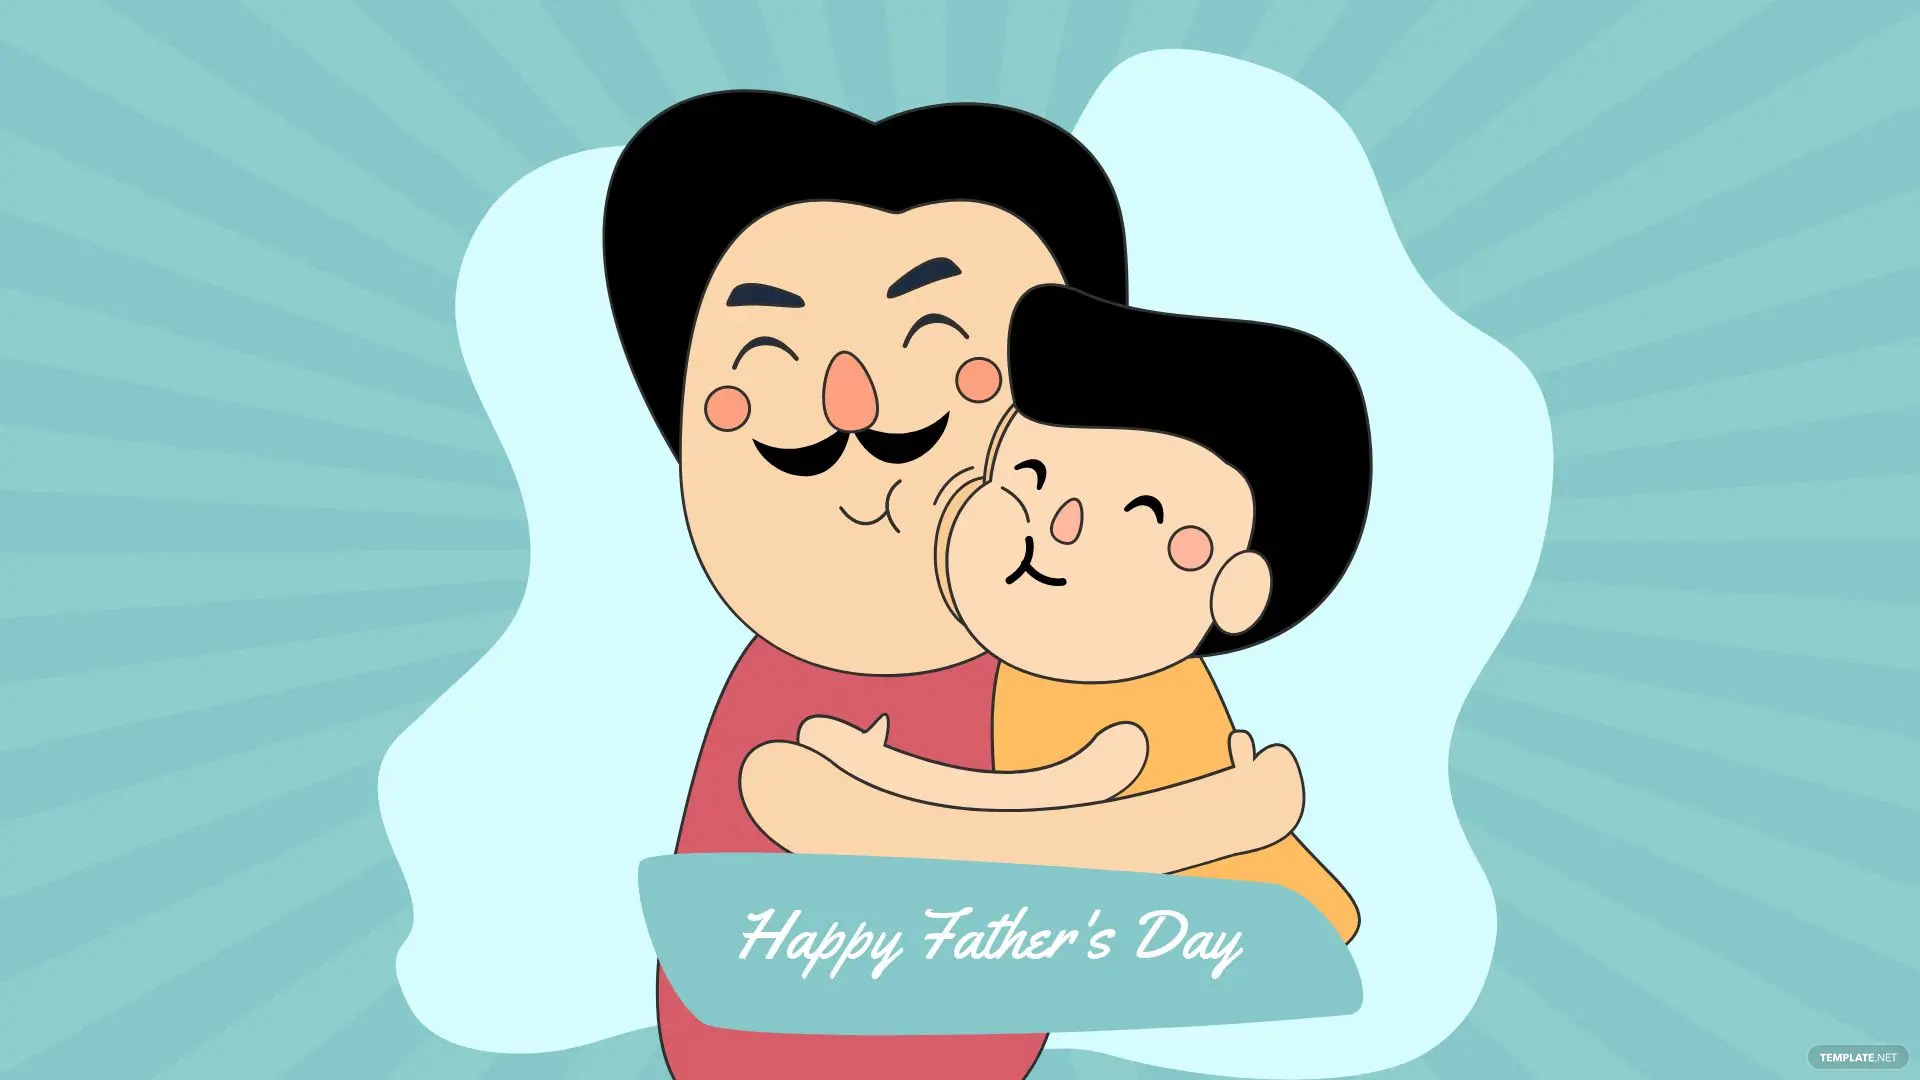 fathers day images ideas and examples